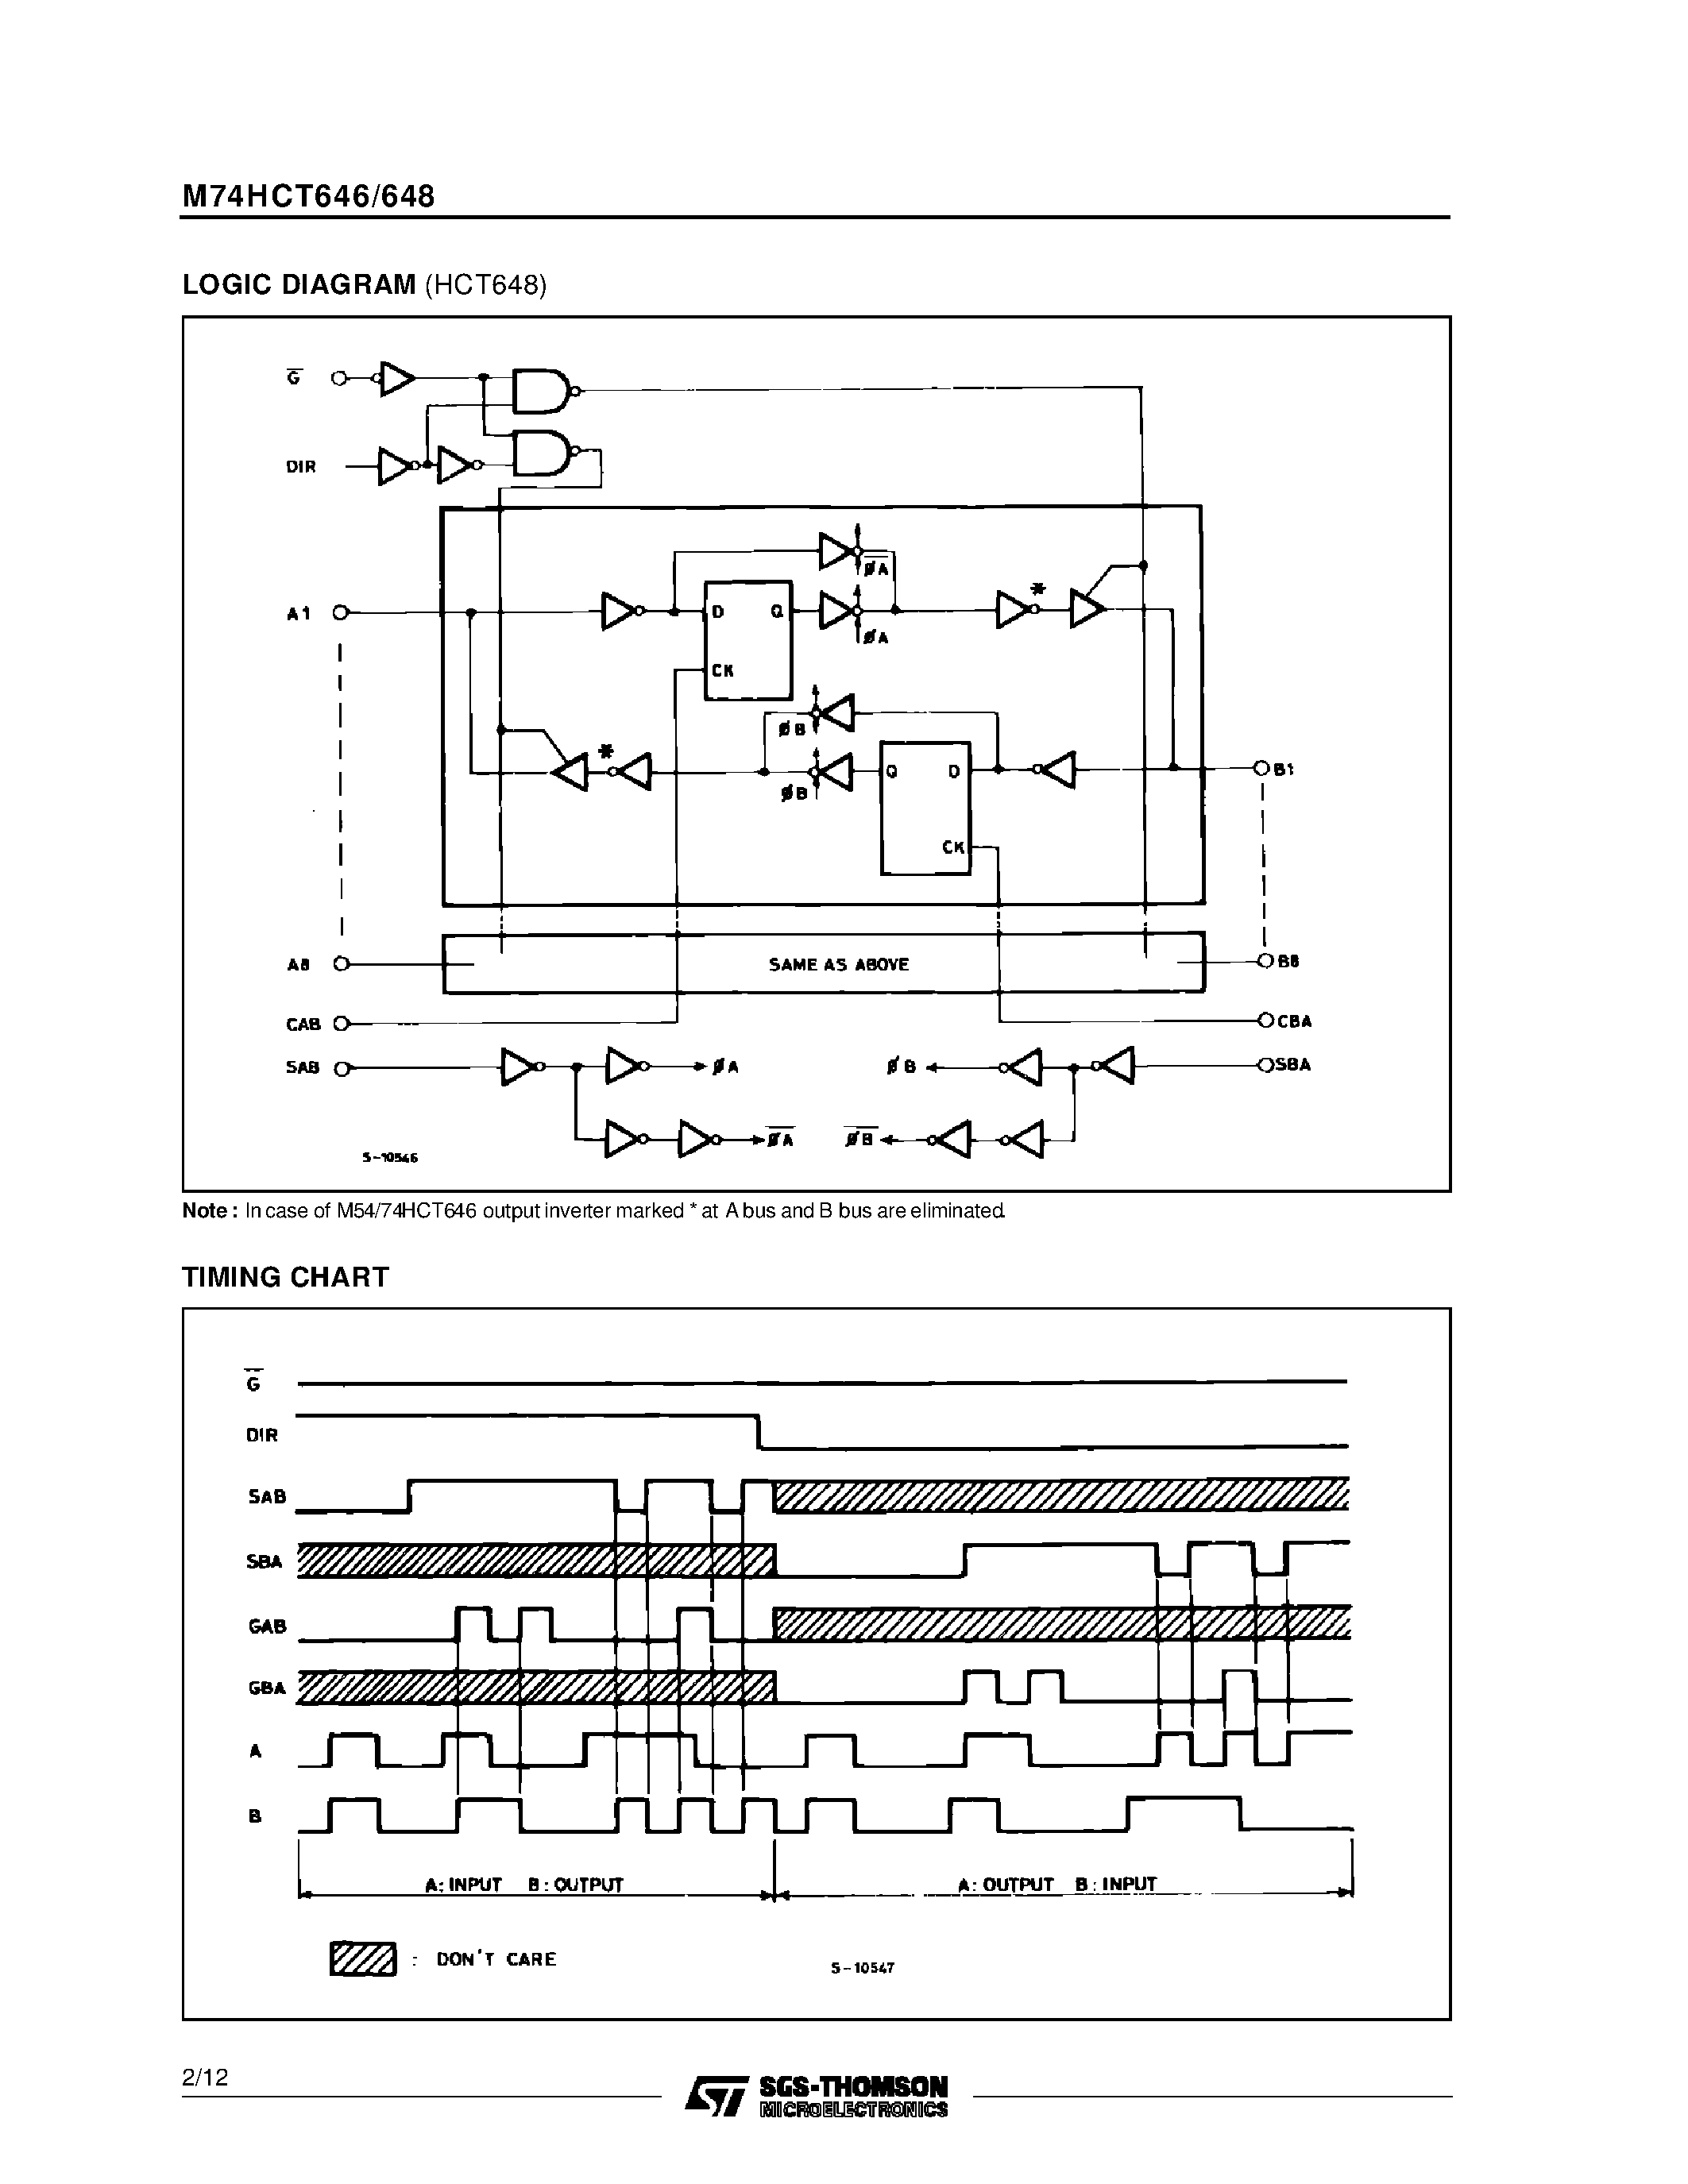 Datasheet M74HCT646 - HCT646 OCTAL BUS TRANSCEIVER/REGISTER 3-STATE HCT648 OCTAL BUS TRANSCEIVER/REGISTER 3-STATE / INV. page 2